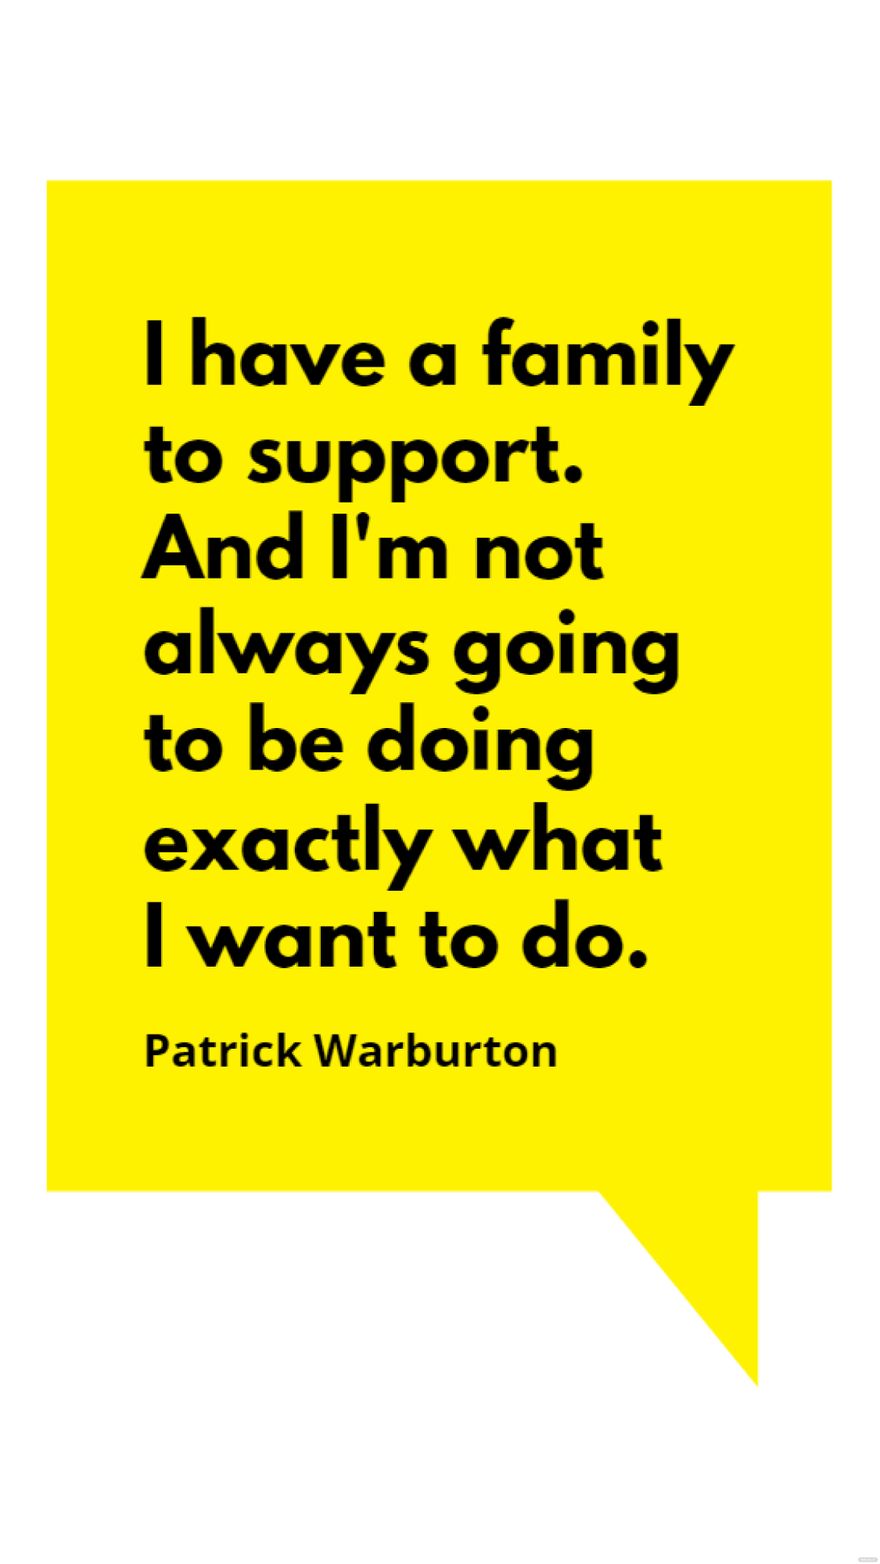 Patrick Warburton - I have a family to support. And I'm not always going to be doing exactly what I want to do.